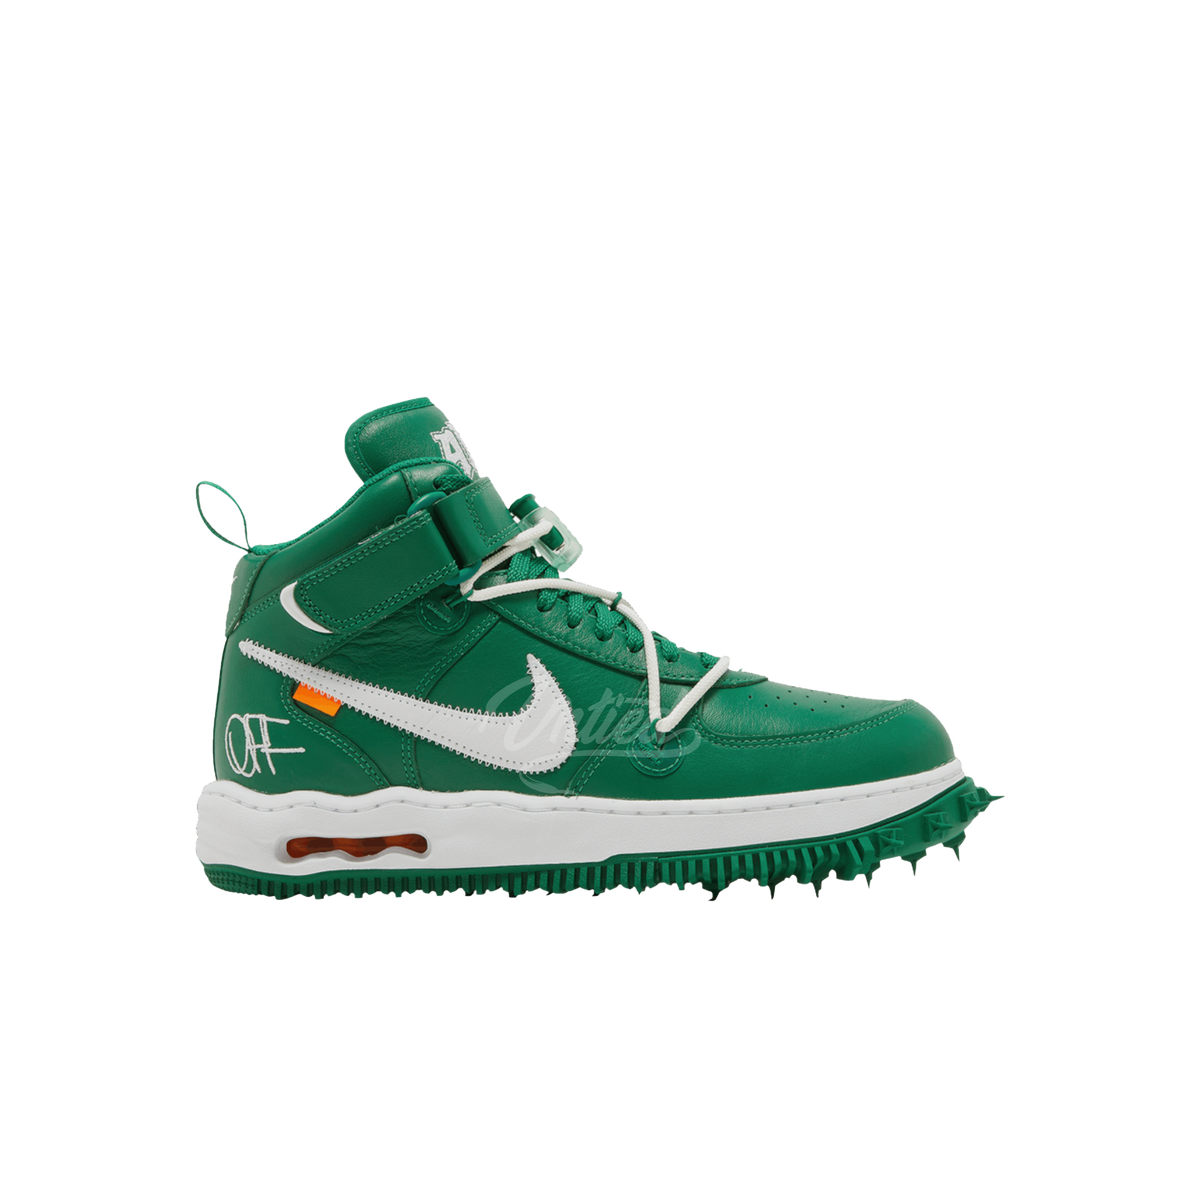 Off-White Nike Air Force 1 Mid "Pine Green"